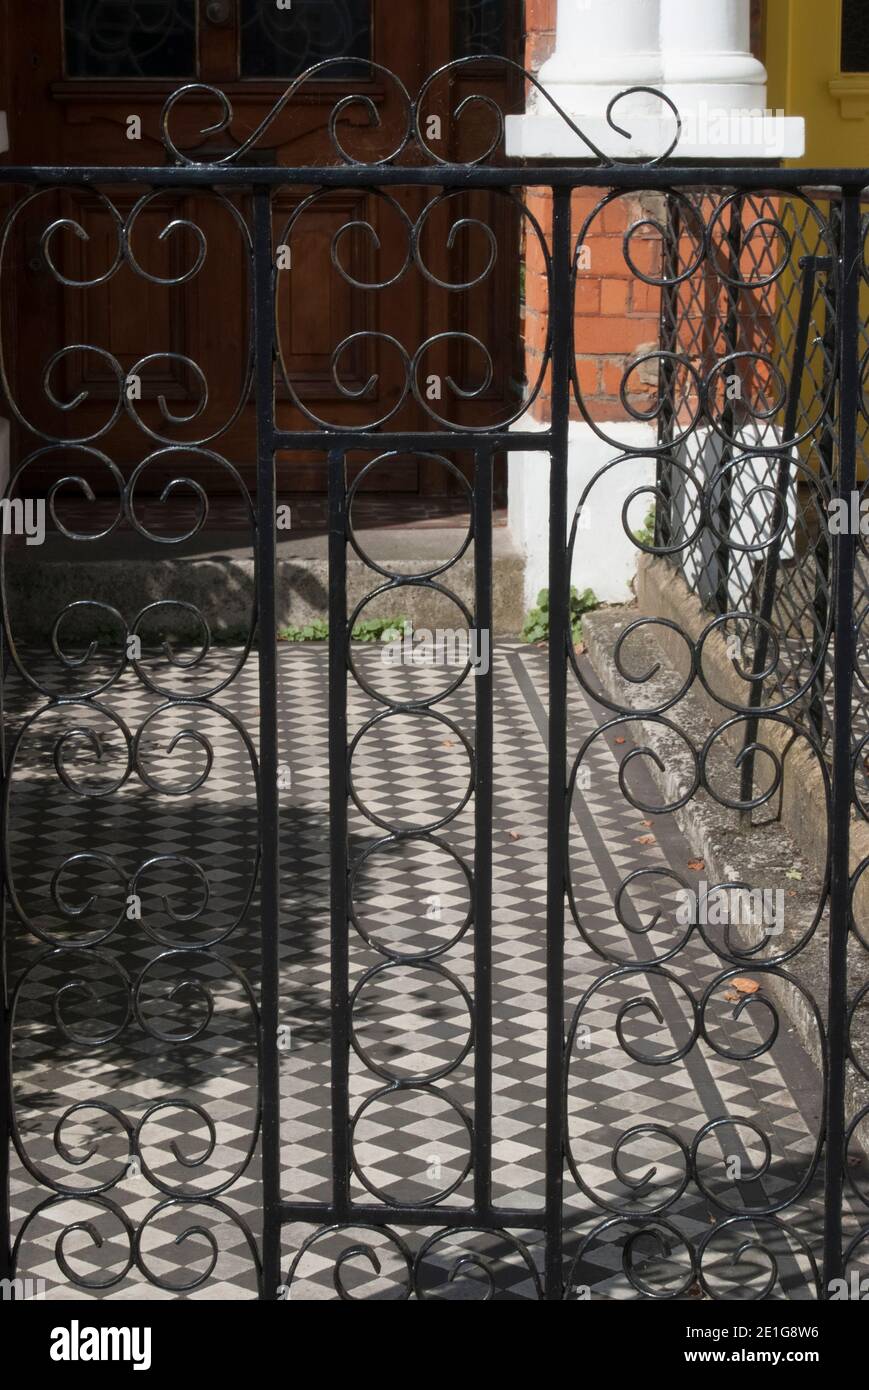 Gate to a house, black and white tiles and a doorstep to a traditional urban house, Victorian era. Stock Photo